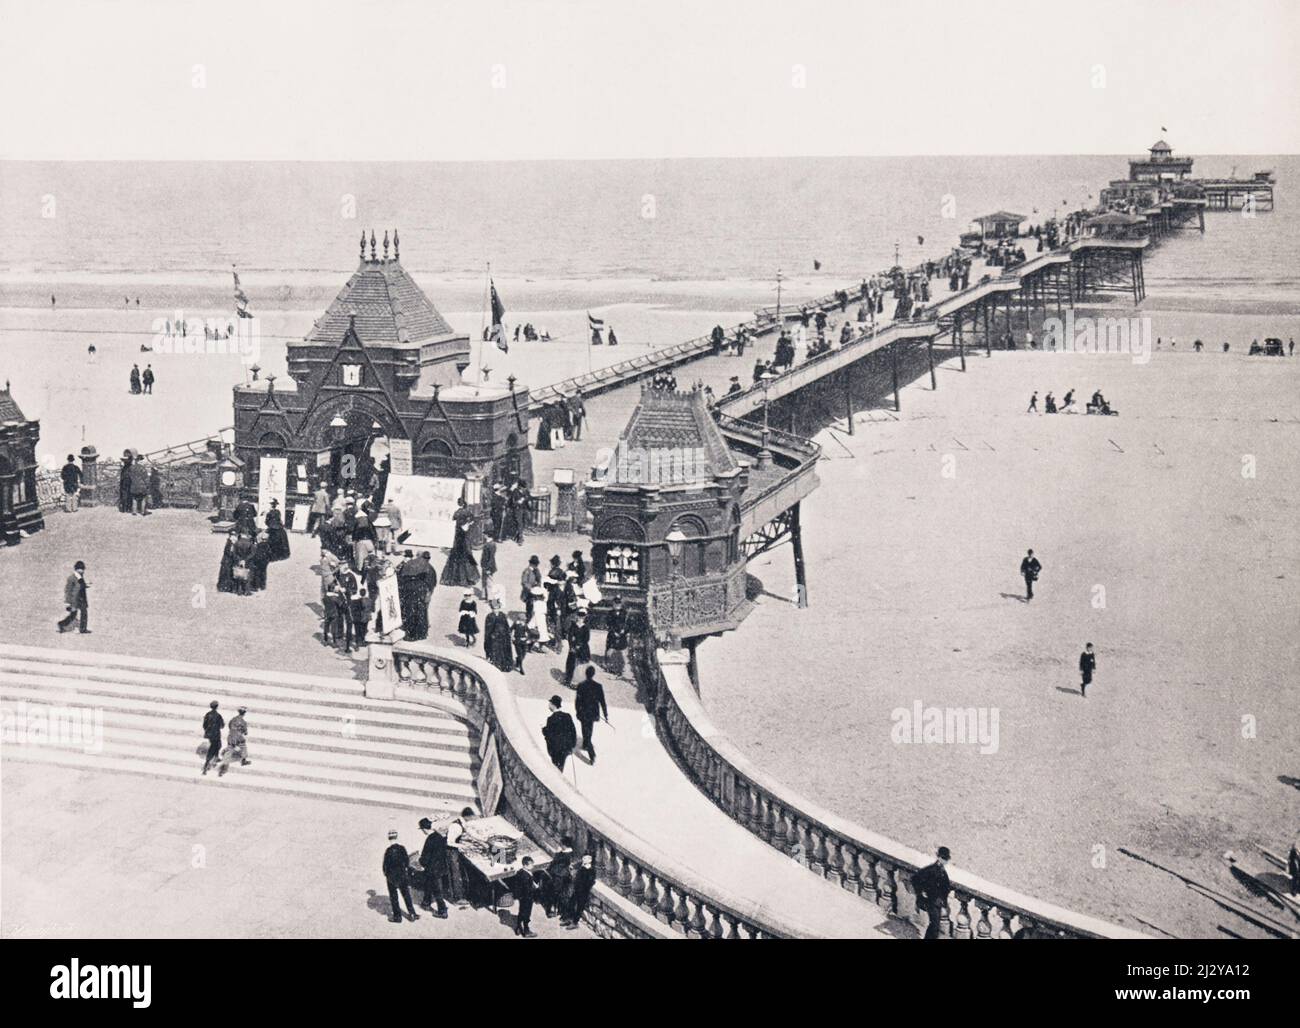 The pier at Skegness, Lincolnshire, England, seen here in the 19th century.  From Around The Coast,  An Album of Pictures from Photographs of the Chief Seaside Places of Interest in Great Britain and Ireland published London, 1895, by George Newnes Limited. Stock Photo